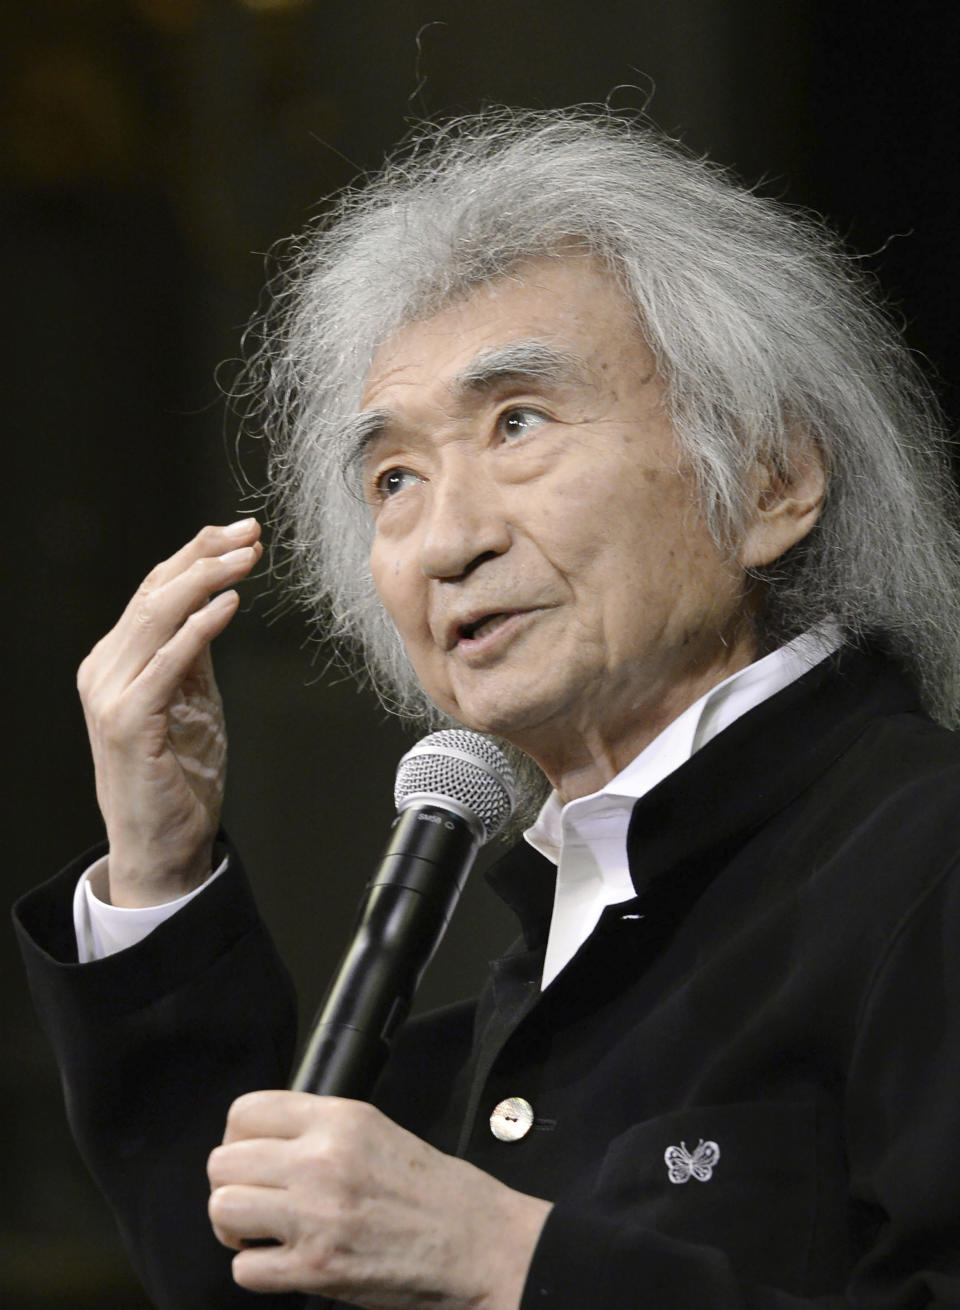 Japanese conductor Seiji Ozawa speaks during a press conference in Kyoto, Japan, on Feb. 2016. World-renowned conductor Ozawa died Tuesday, Feb. 6, due to heart failure at his home in Tokyo, his management office said Friday, Feb. 9, 2024. He was 88. (Kyodo News via AP)